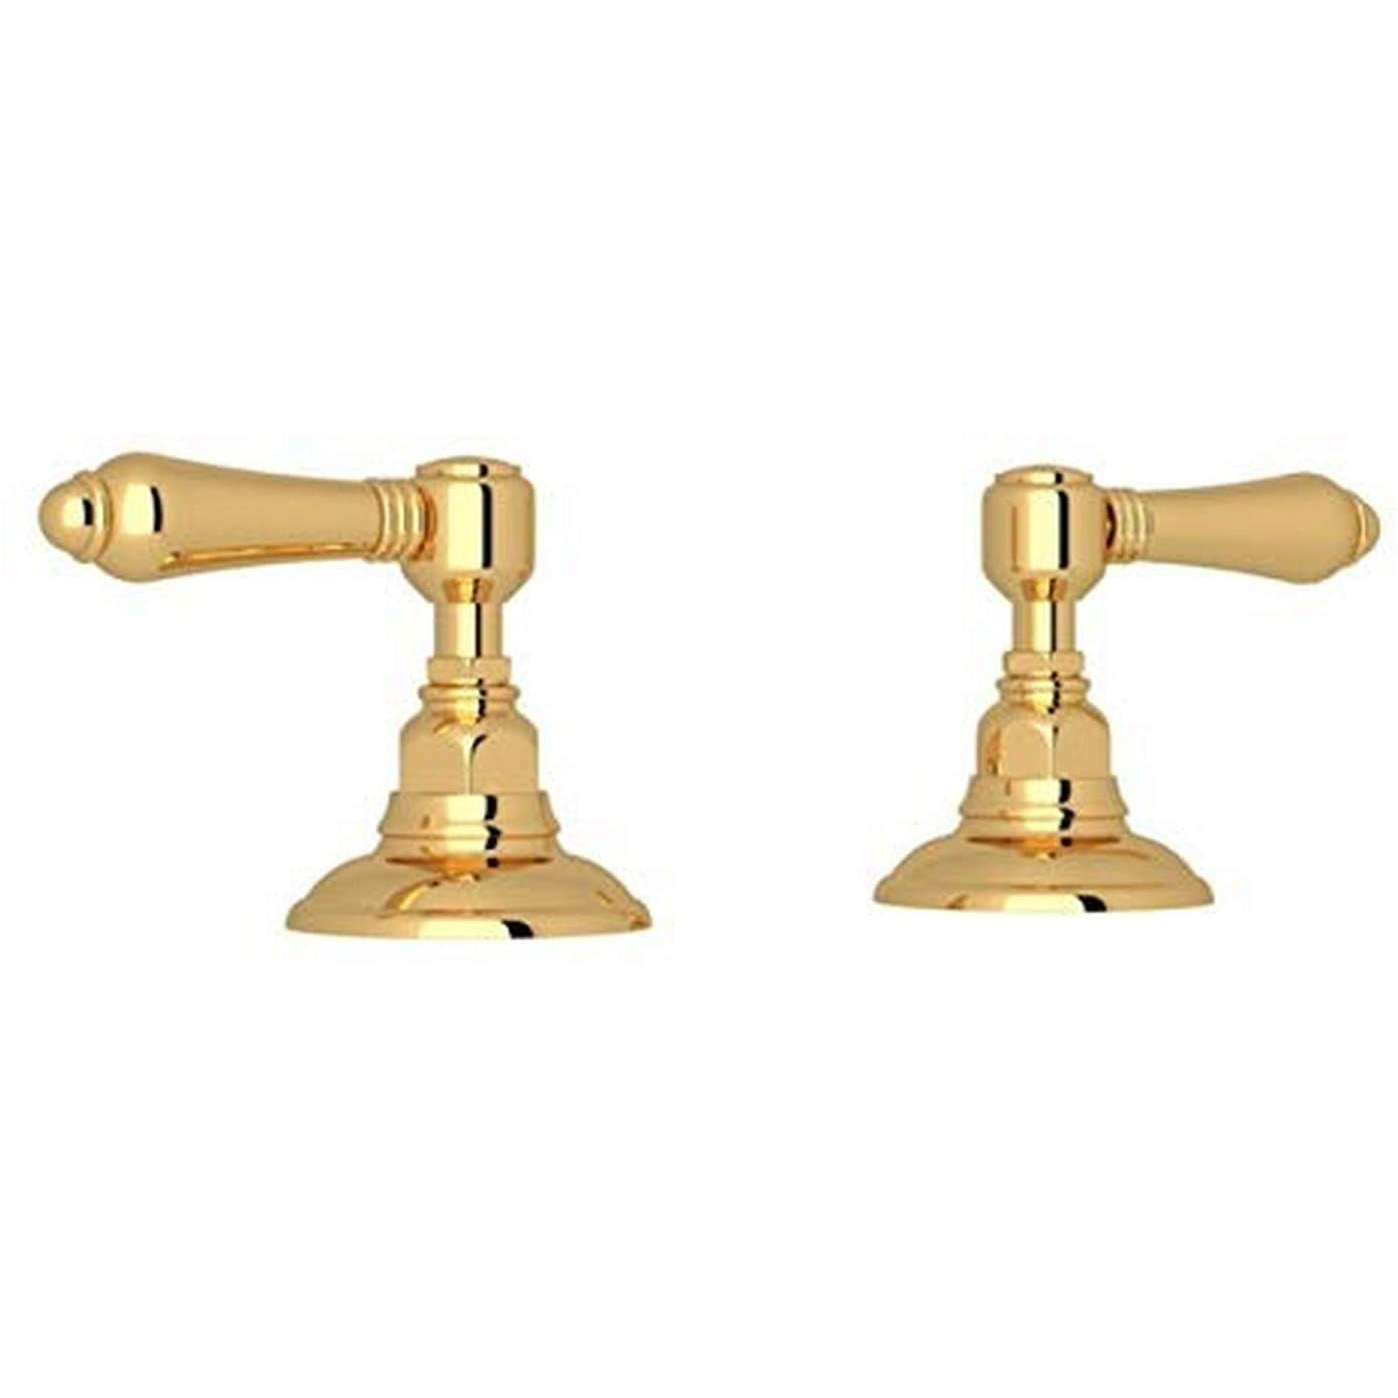 Country Bath Deck Mounted Sidevalves In Italian Brass